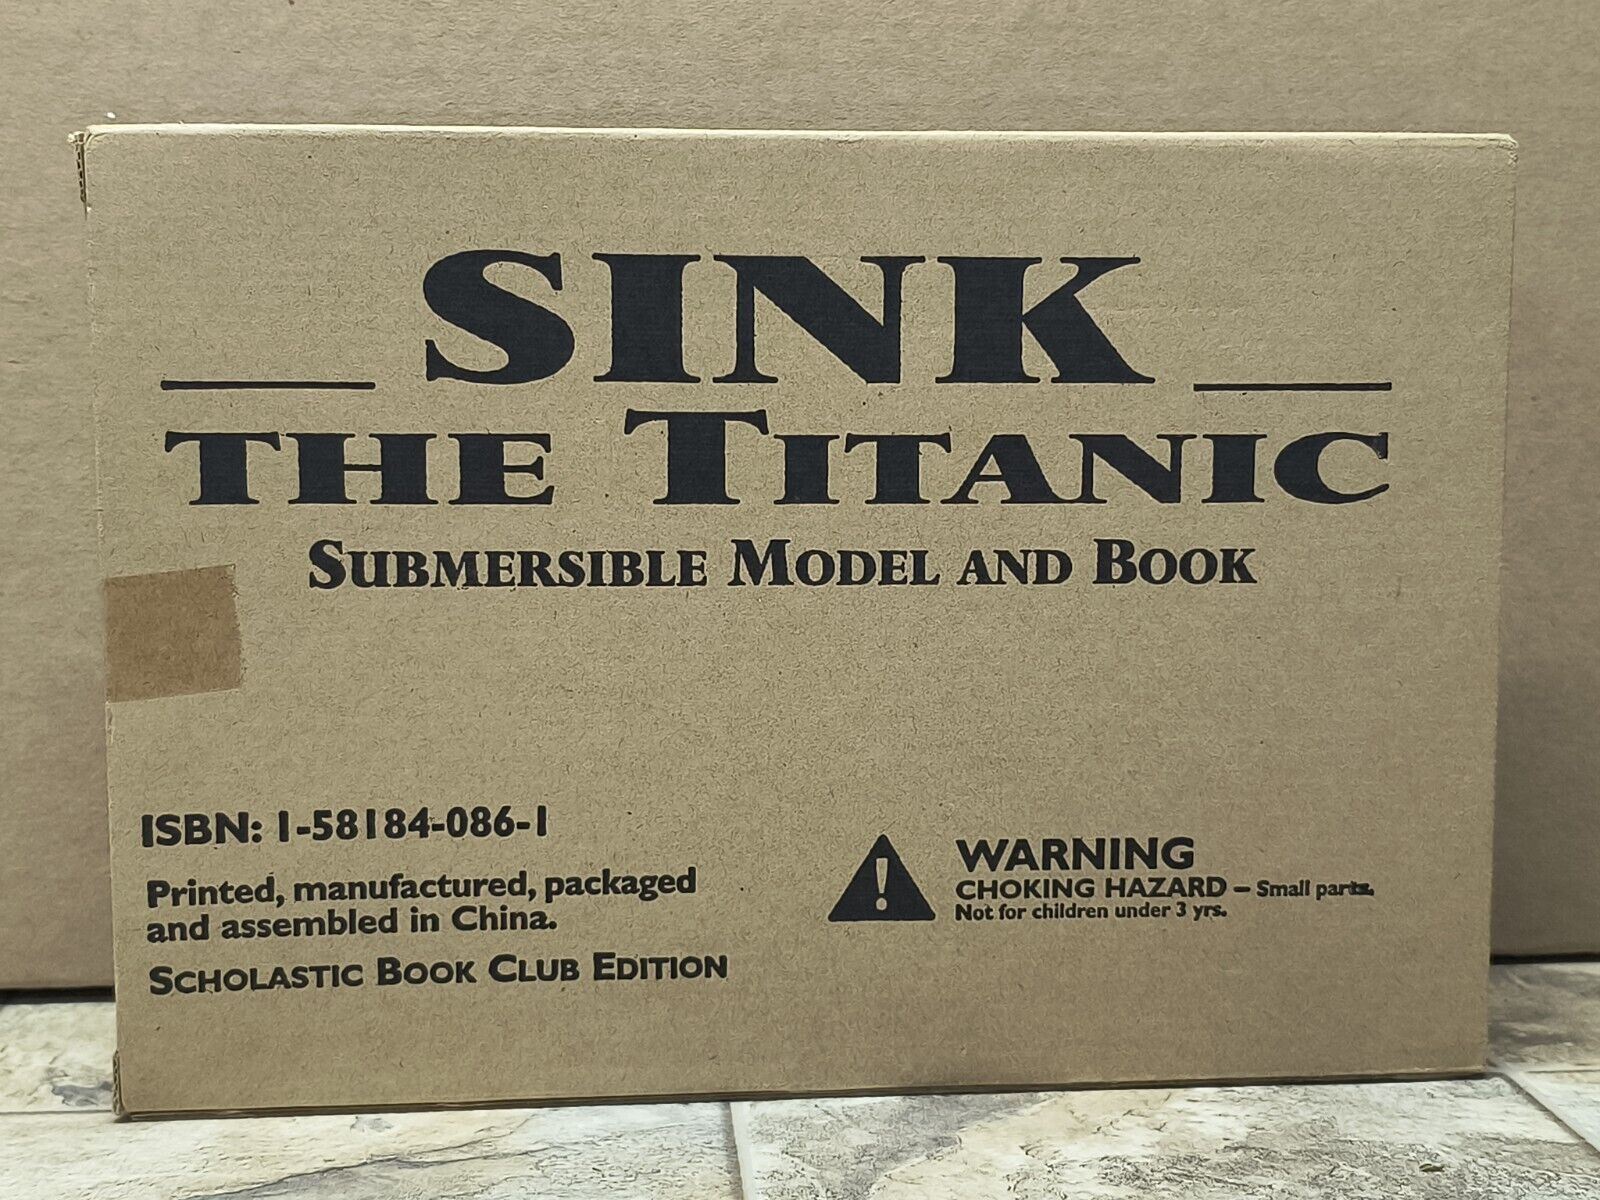 New Never Opened Sink The Titanic Submersible Model And Book. See Pictures 